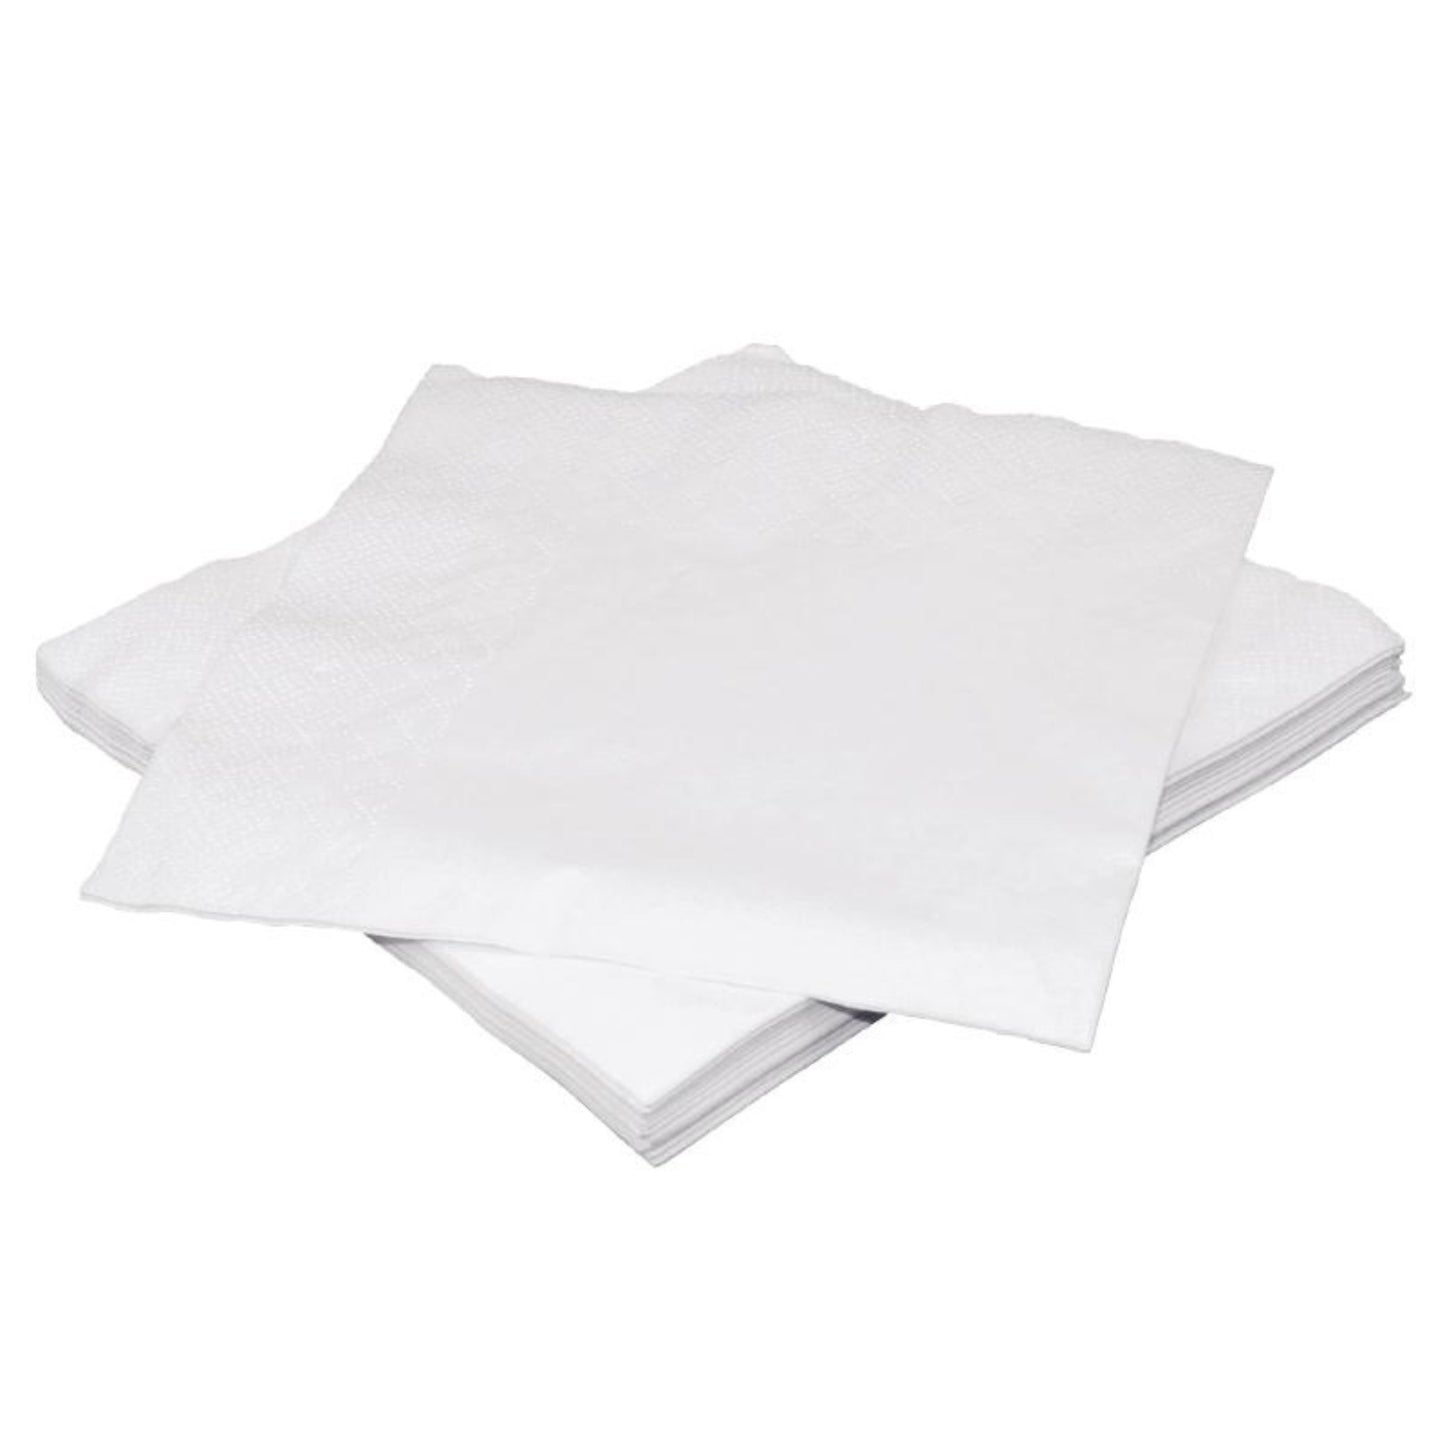 1 Ply Lunch Napkins 1/4 Fold White 12 x 500